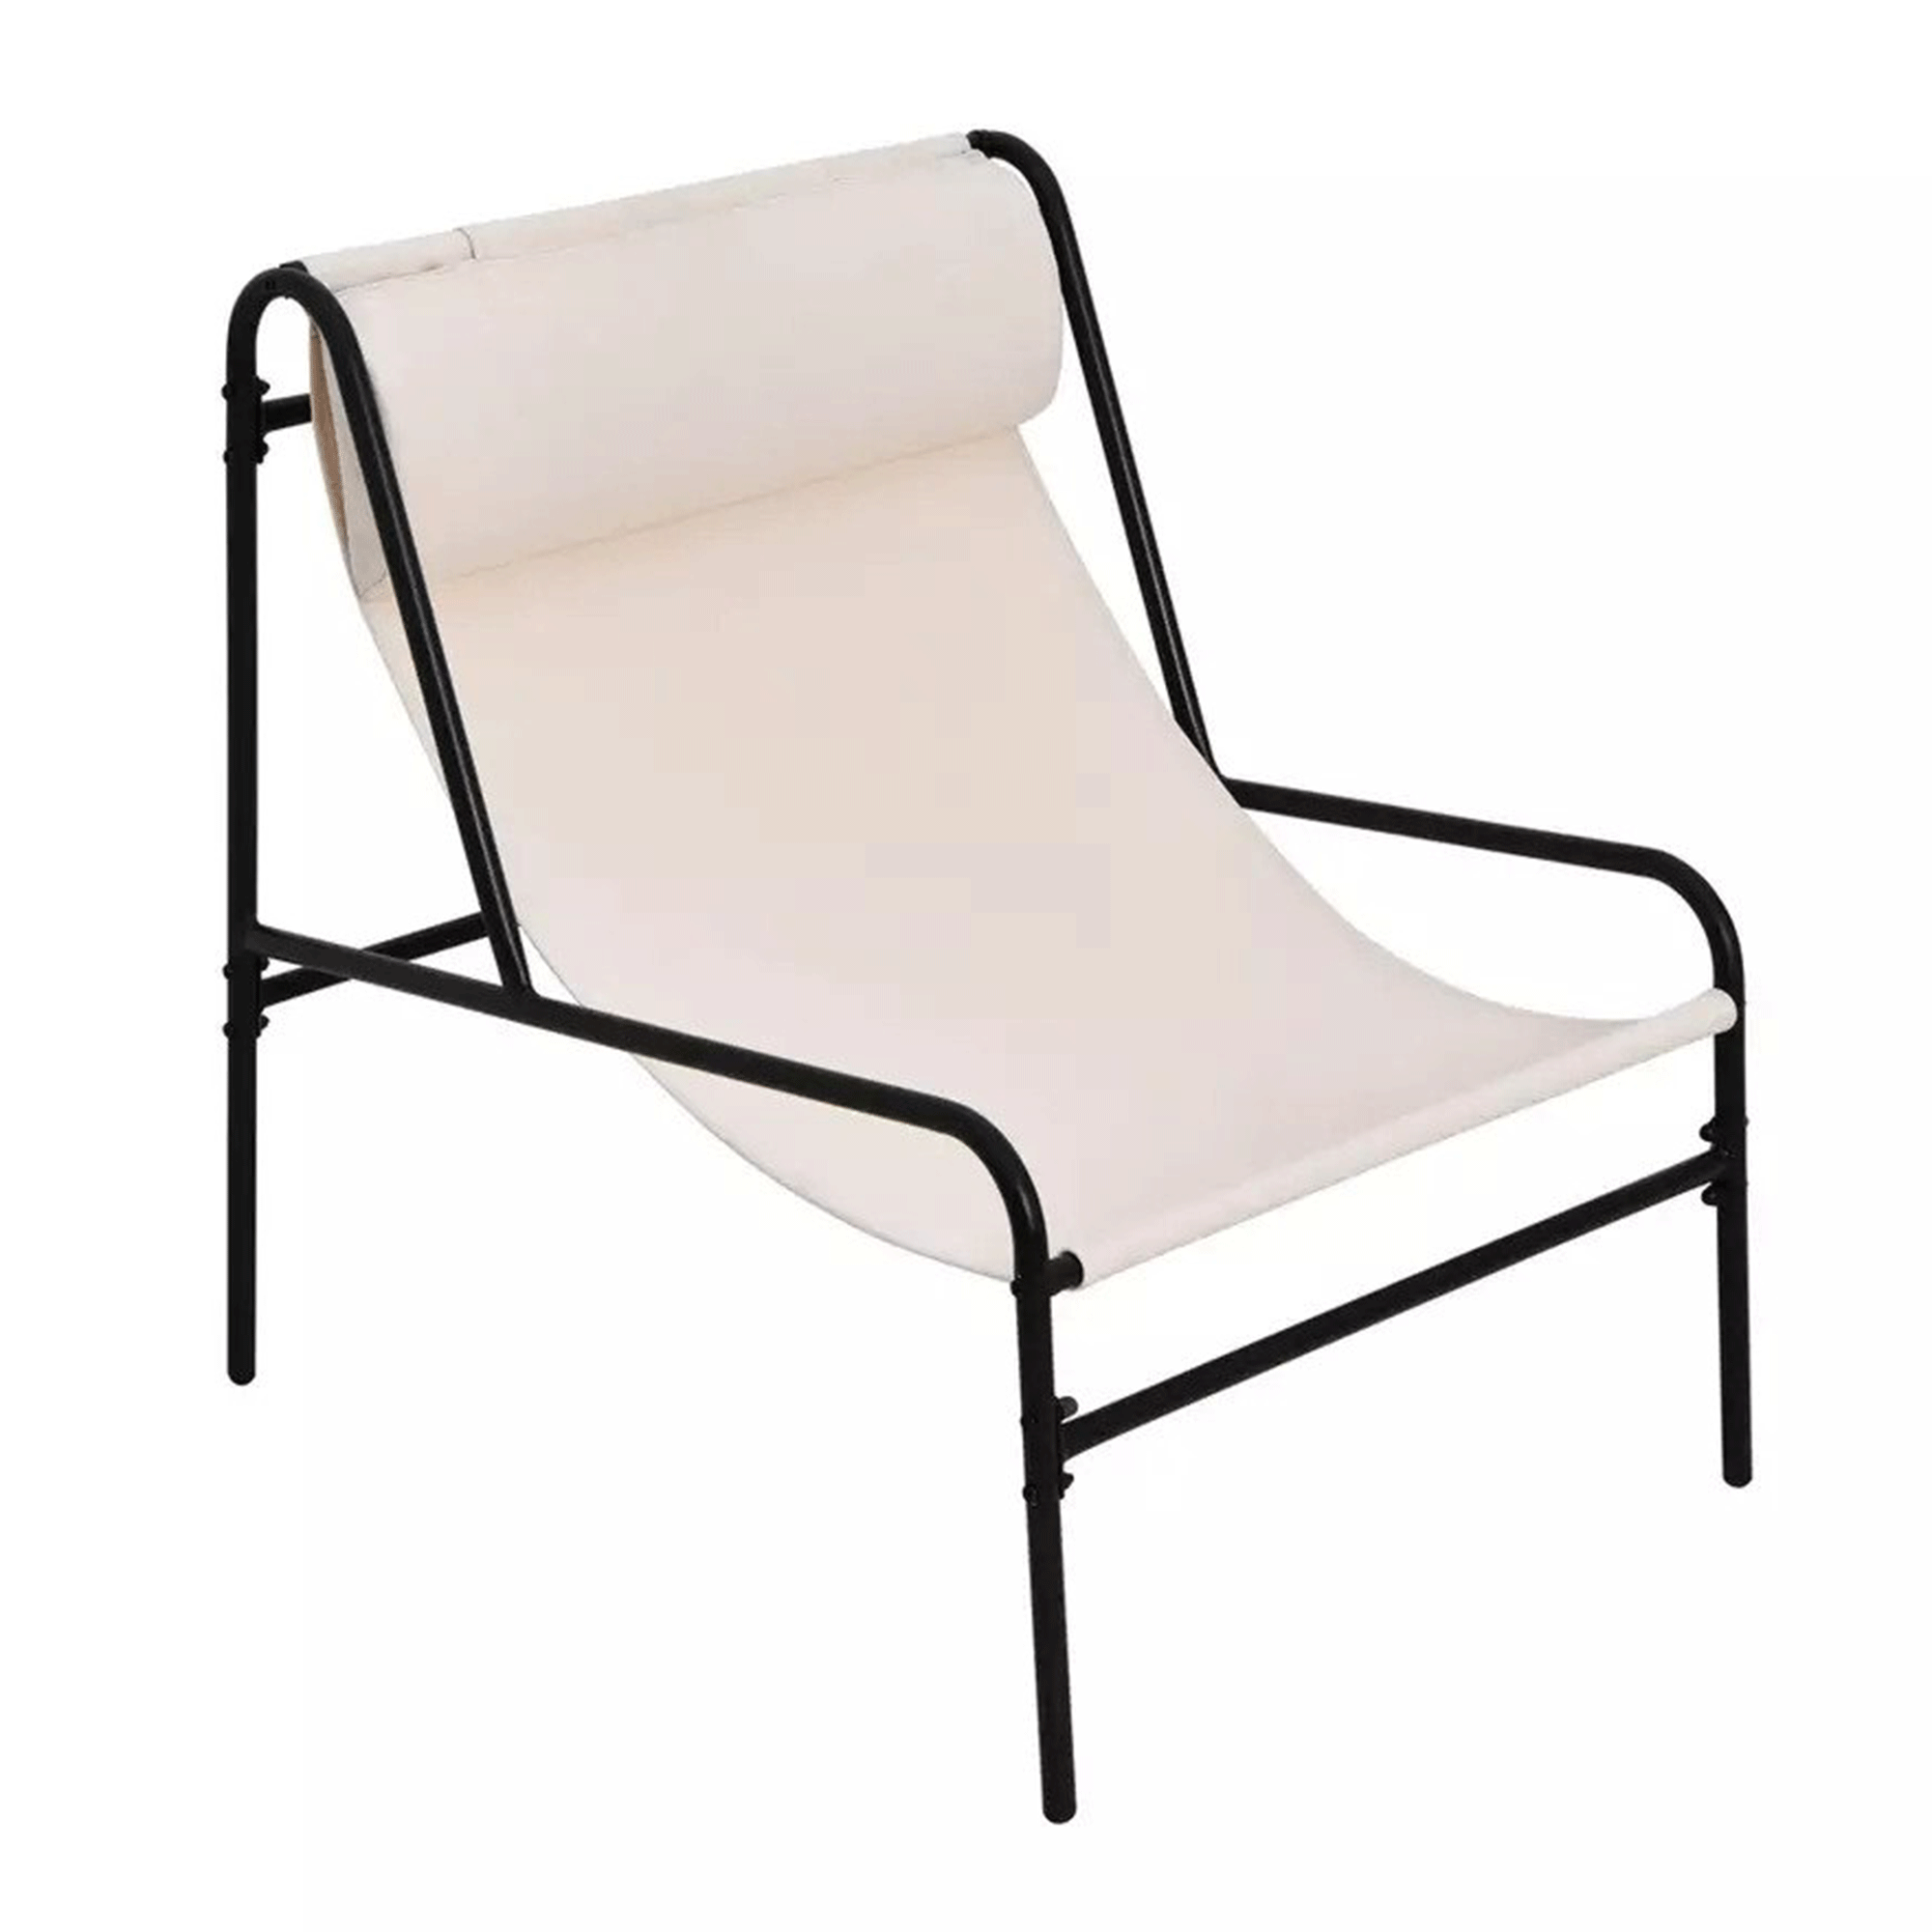 Lounge chair in white and black